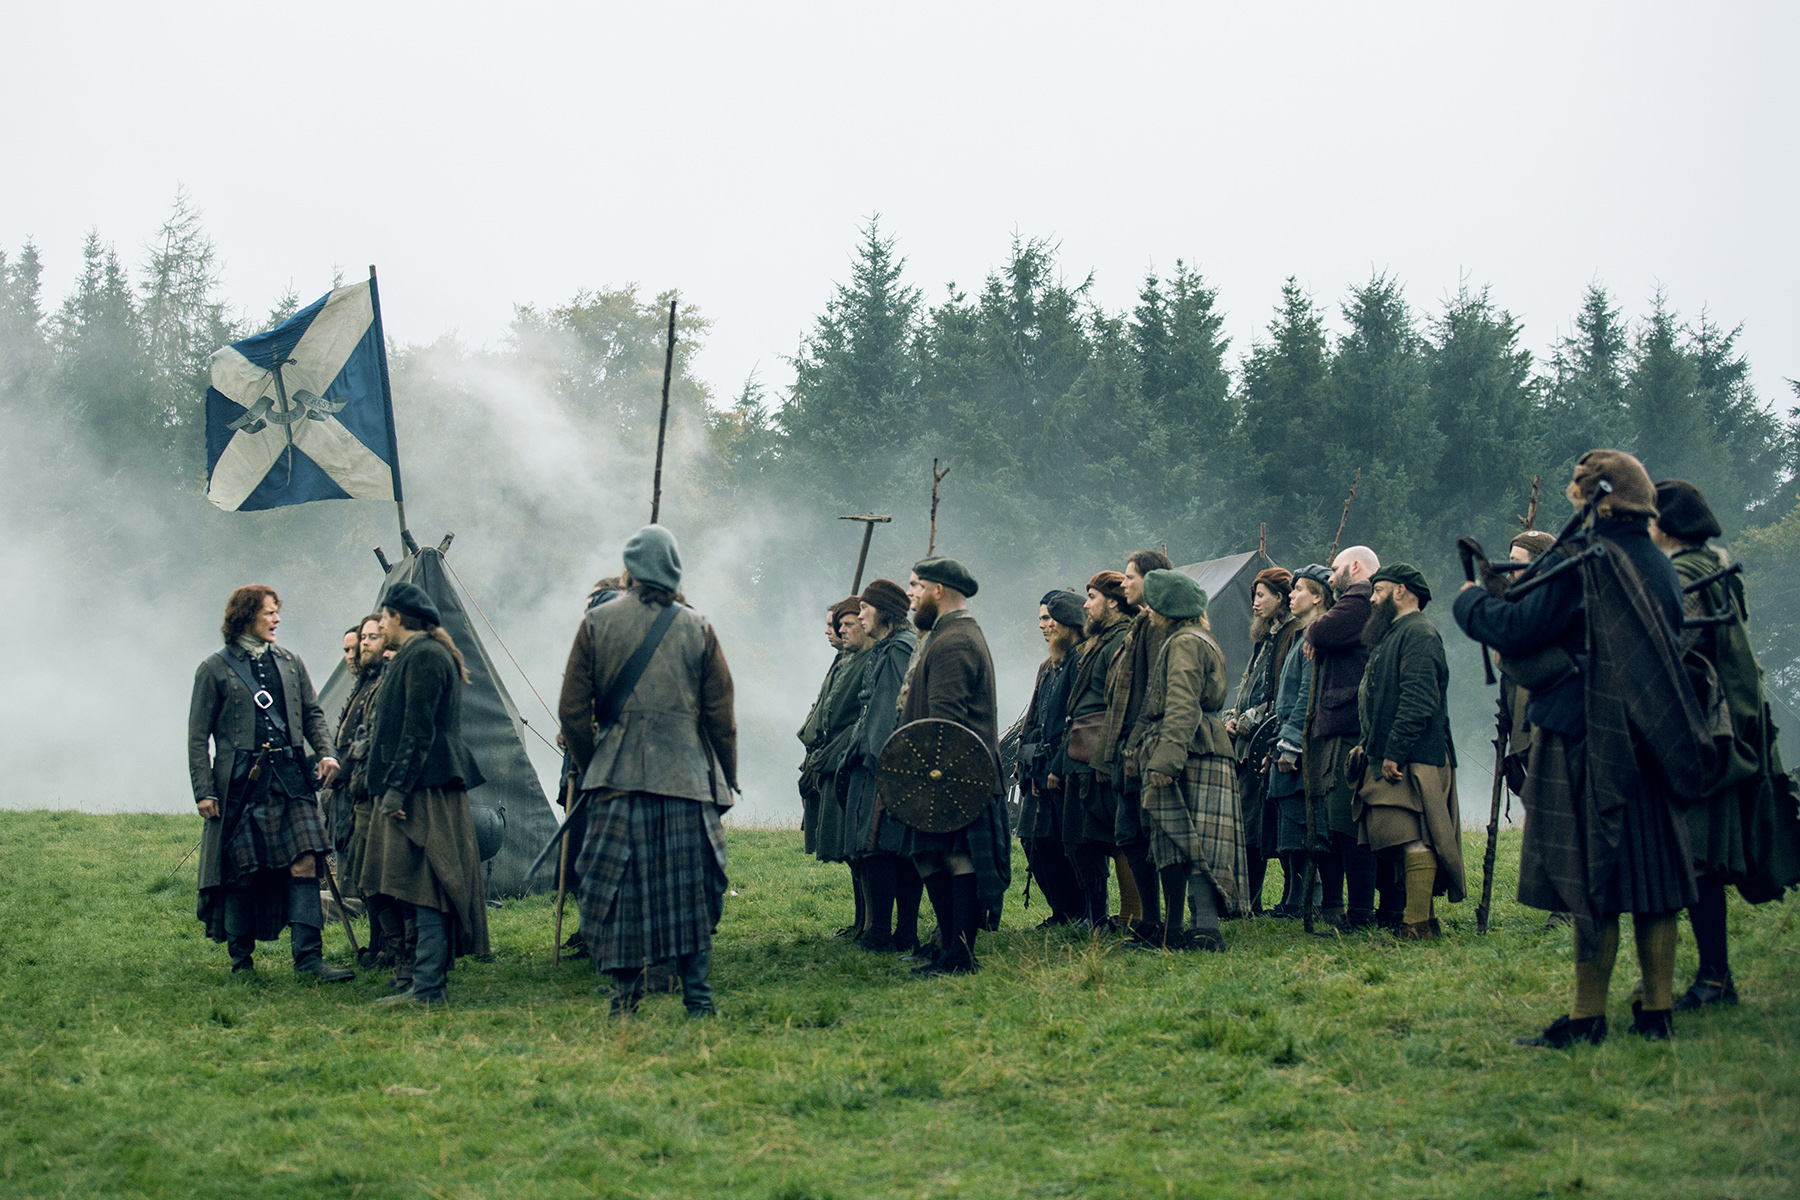 Let's get down to business. To defeat. THE BRITISH. (On left, Sam Heughan as Jamie Fraser instructing his new troops.)